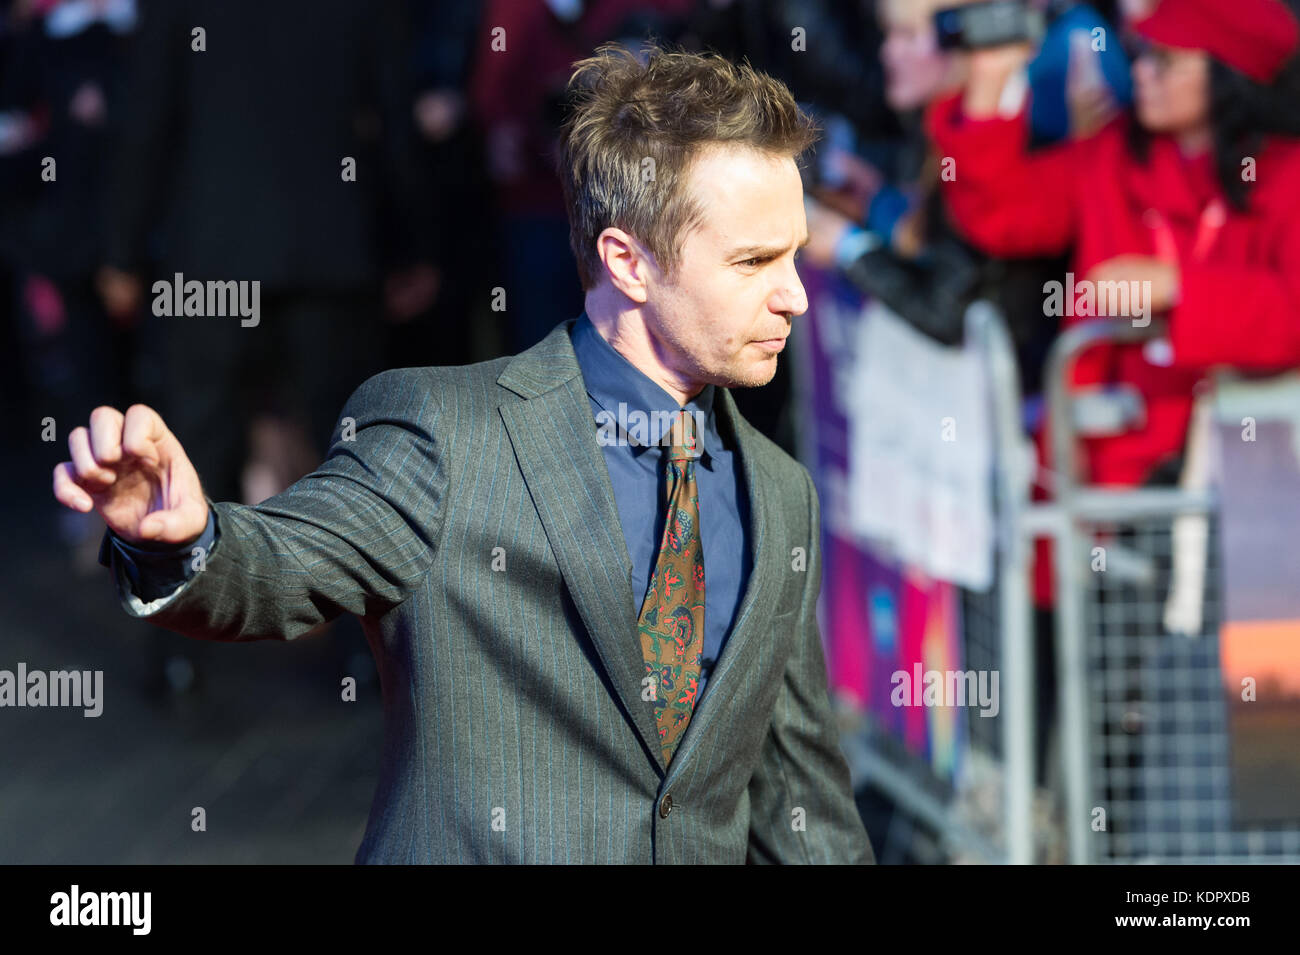 London, UK. 15th October 2017. Sam Rockwell arrives for the UK film premiere of 'Three Billboards Outside Ebbing, Missouri' at Odeon Leicester Square during the 61st BFI London Film Festival, Closing Night Gala. Credit: Wiktor Szymanowicz/Alamy Live News Stock Photo